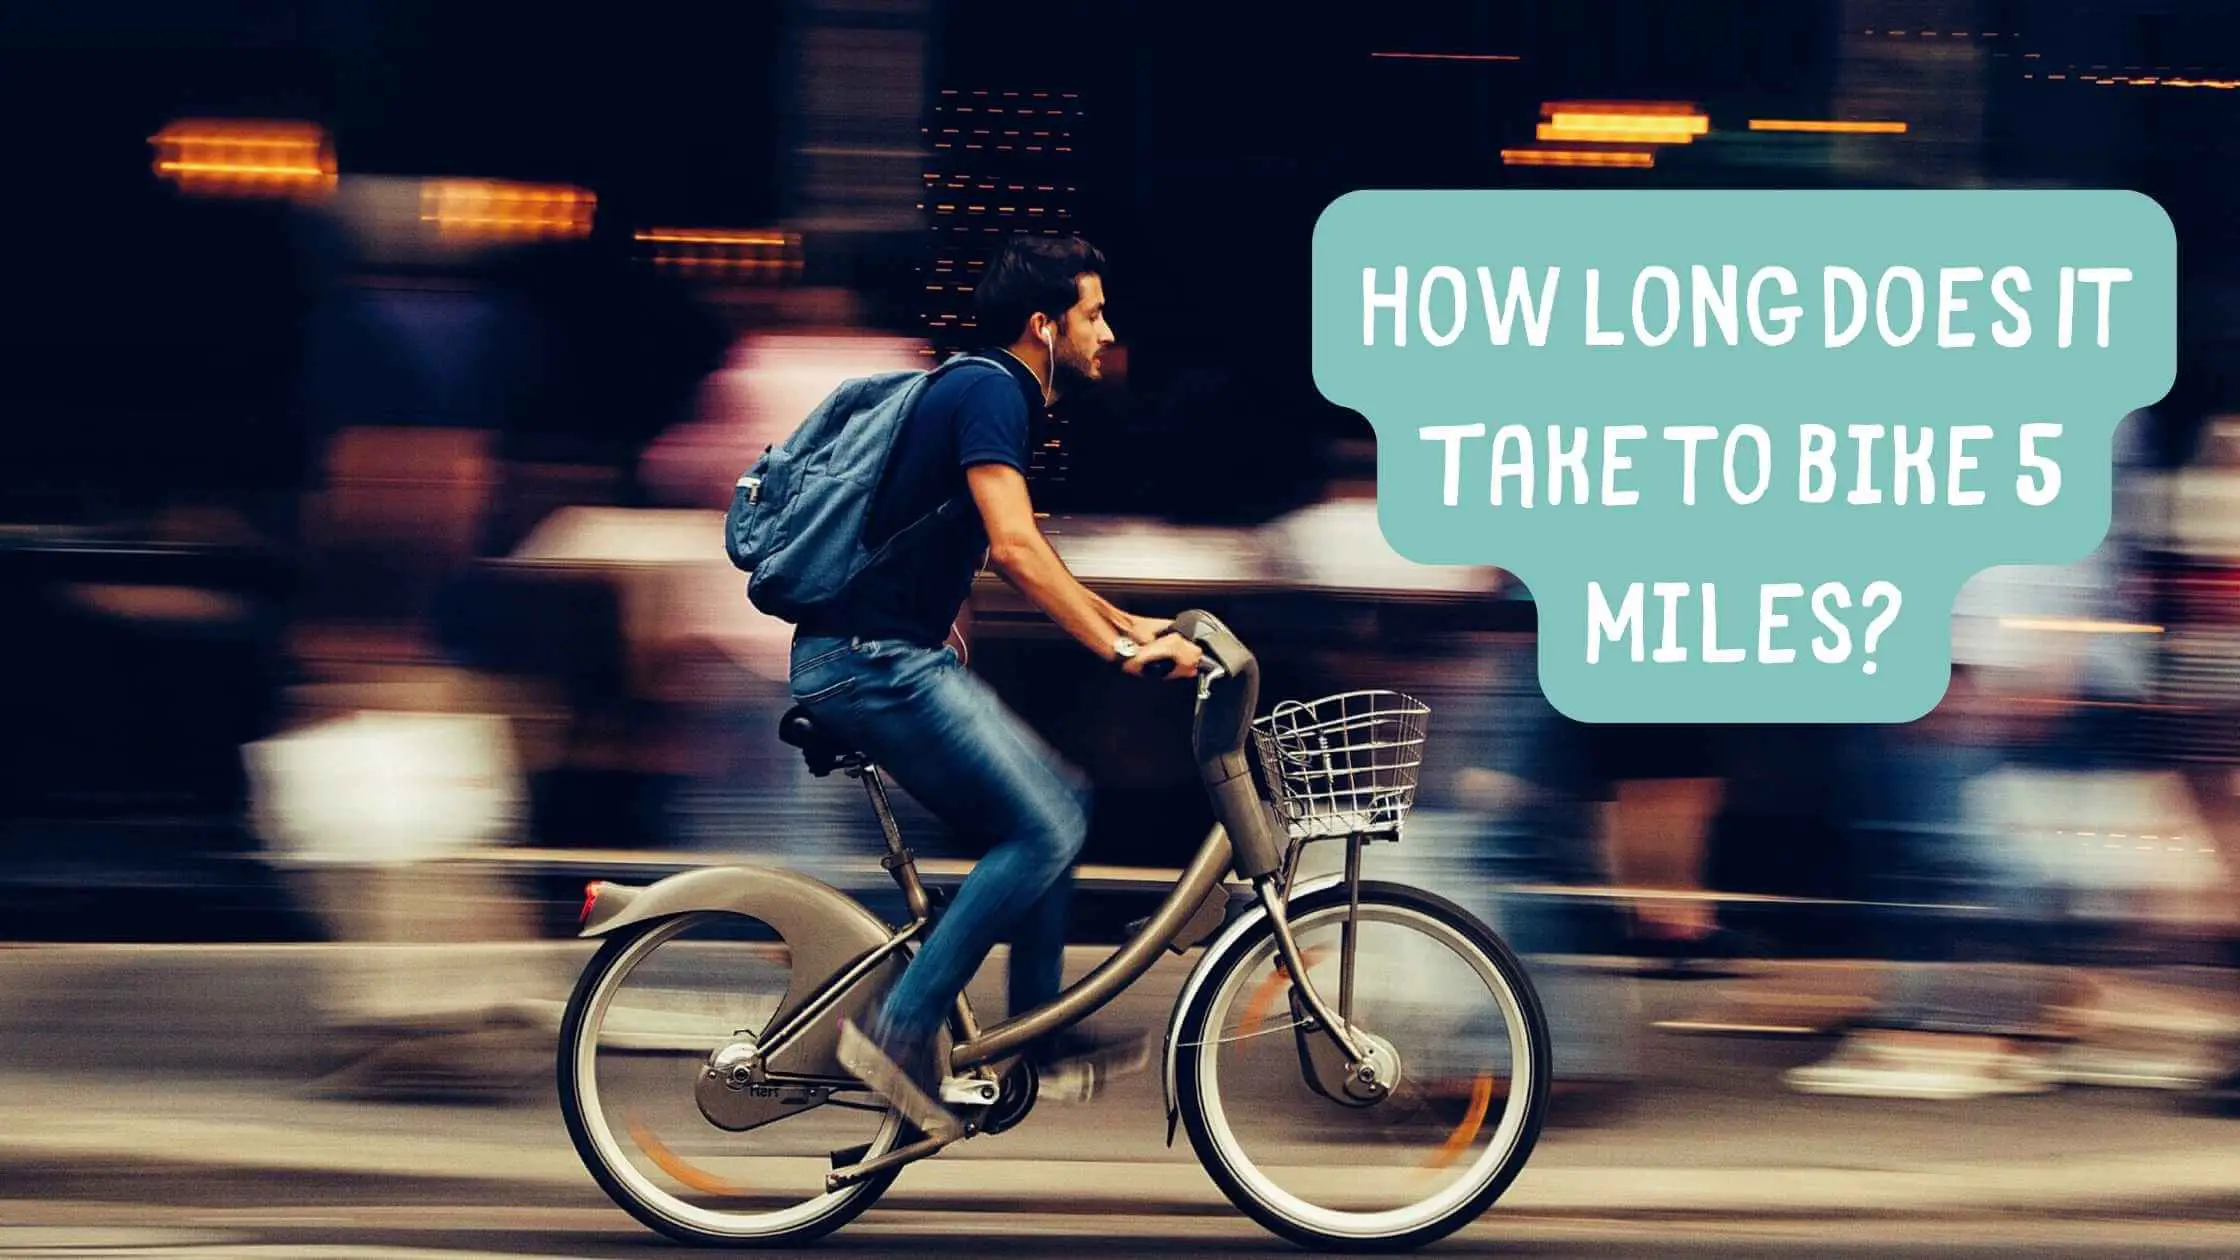 How Long Does It Take to Bike 5 Miles